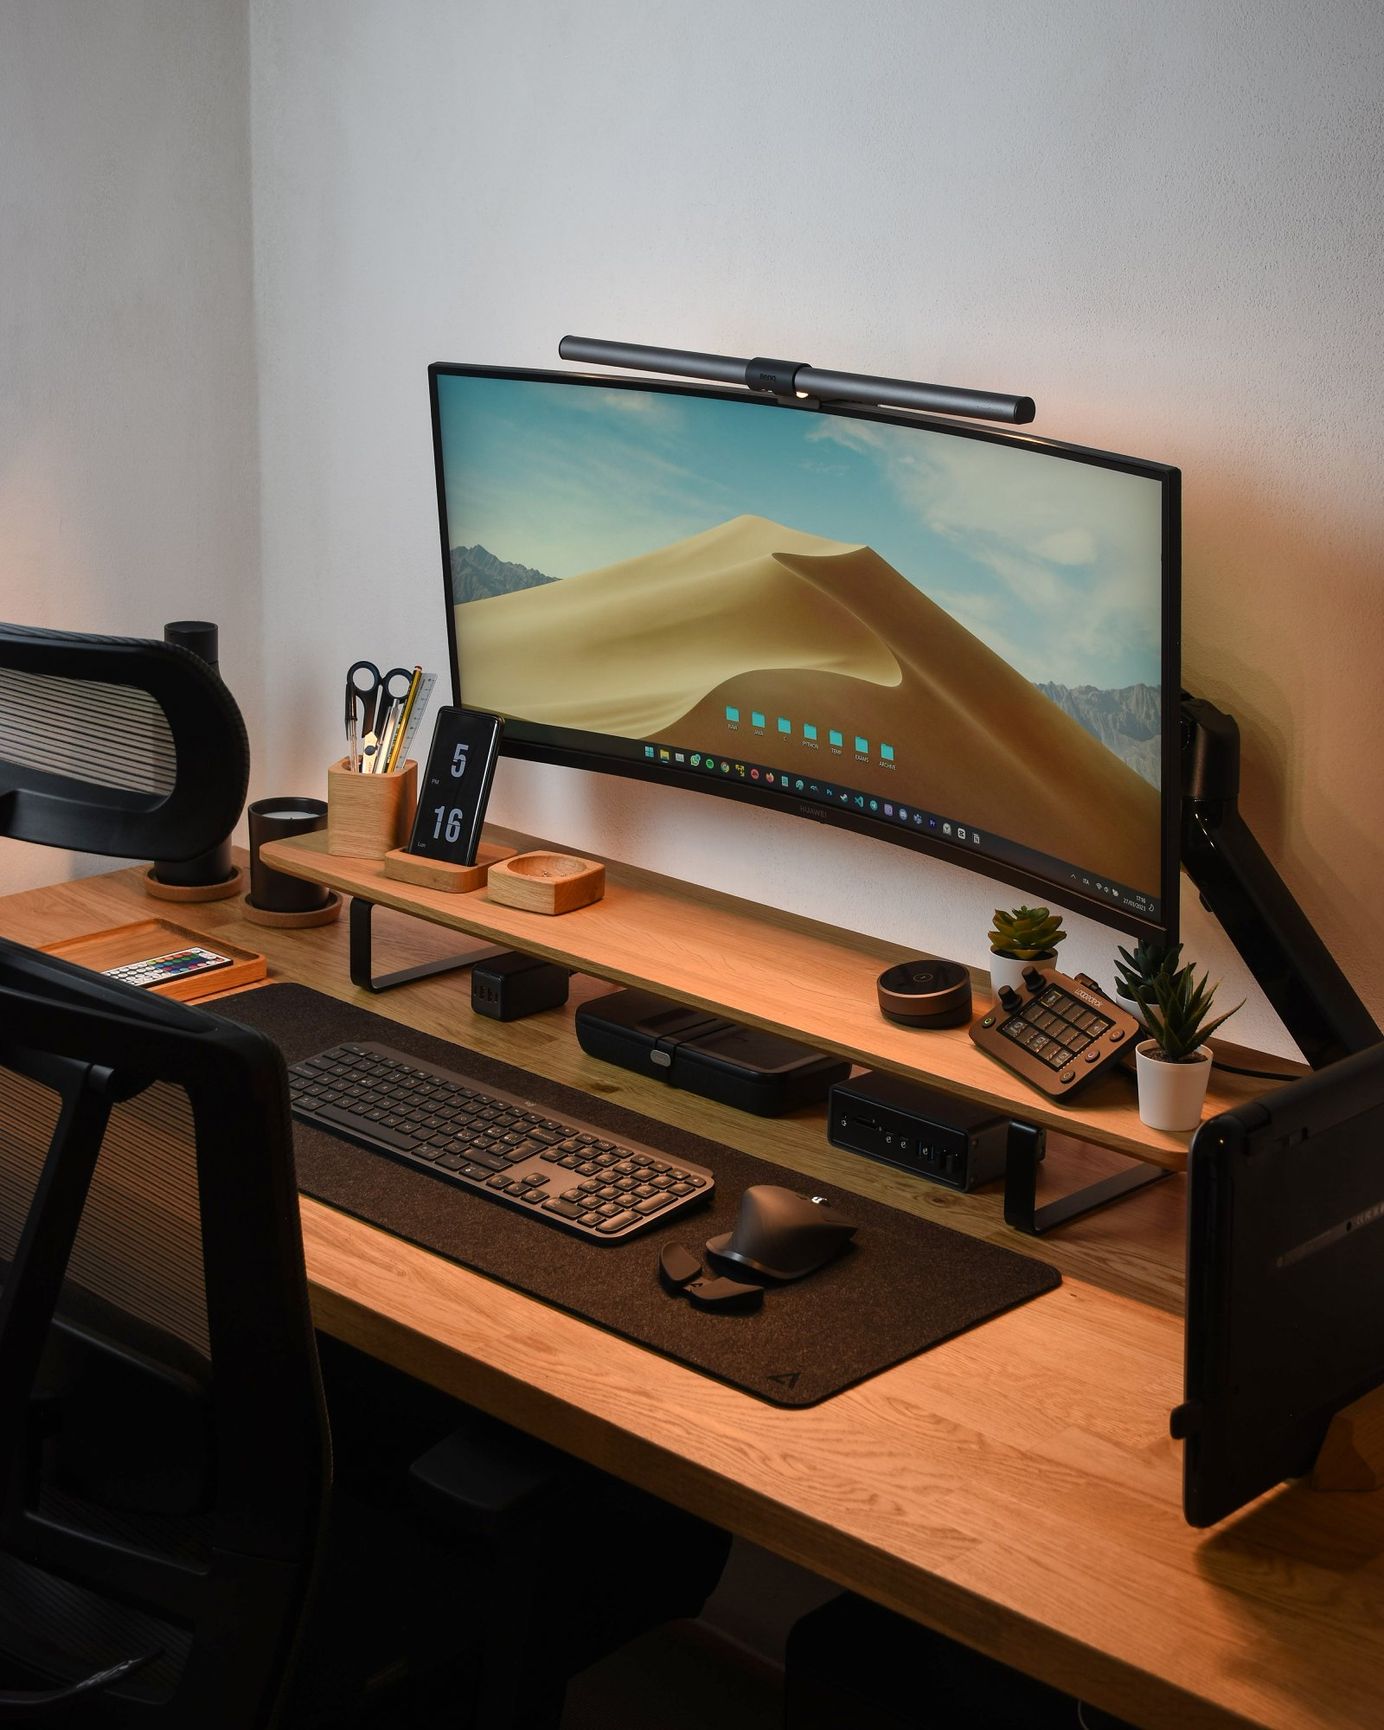 PC Gaming Accessories for a Minimalist Desk Setup